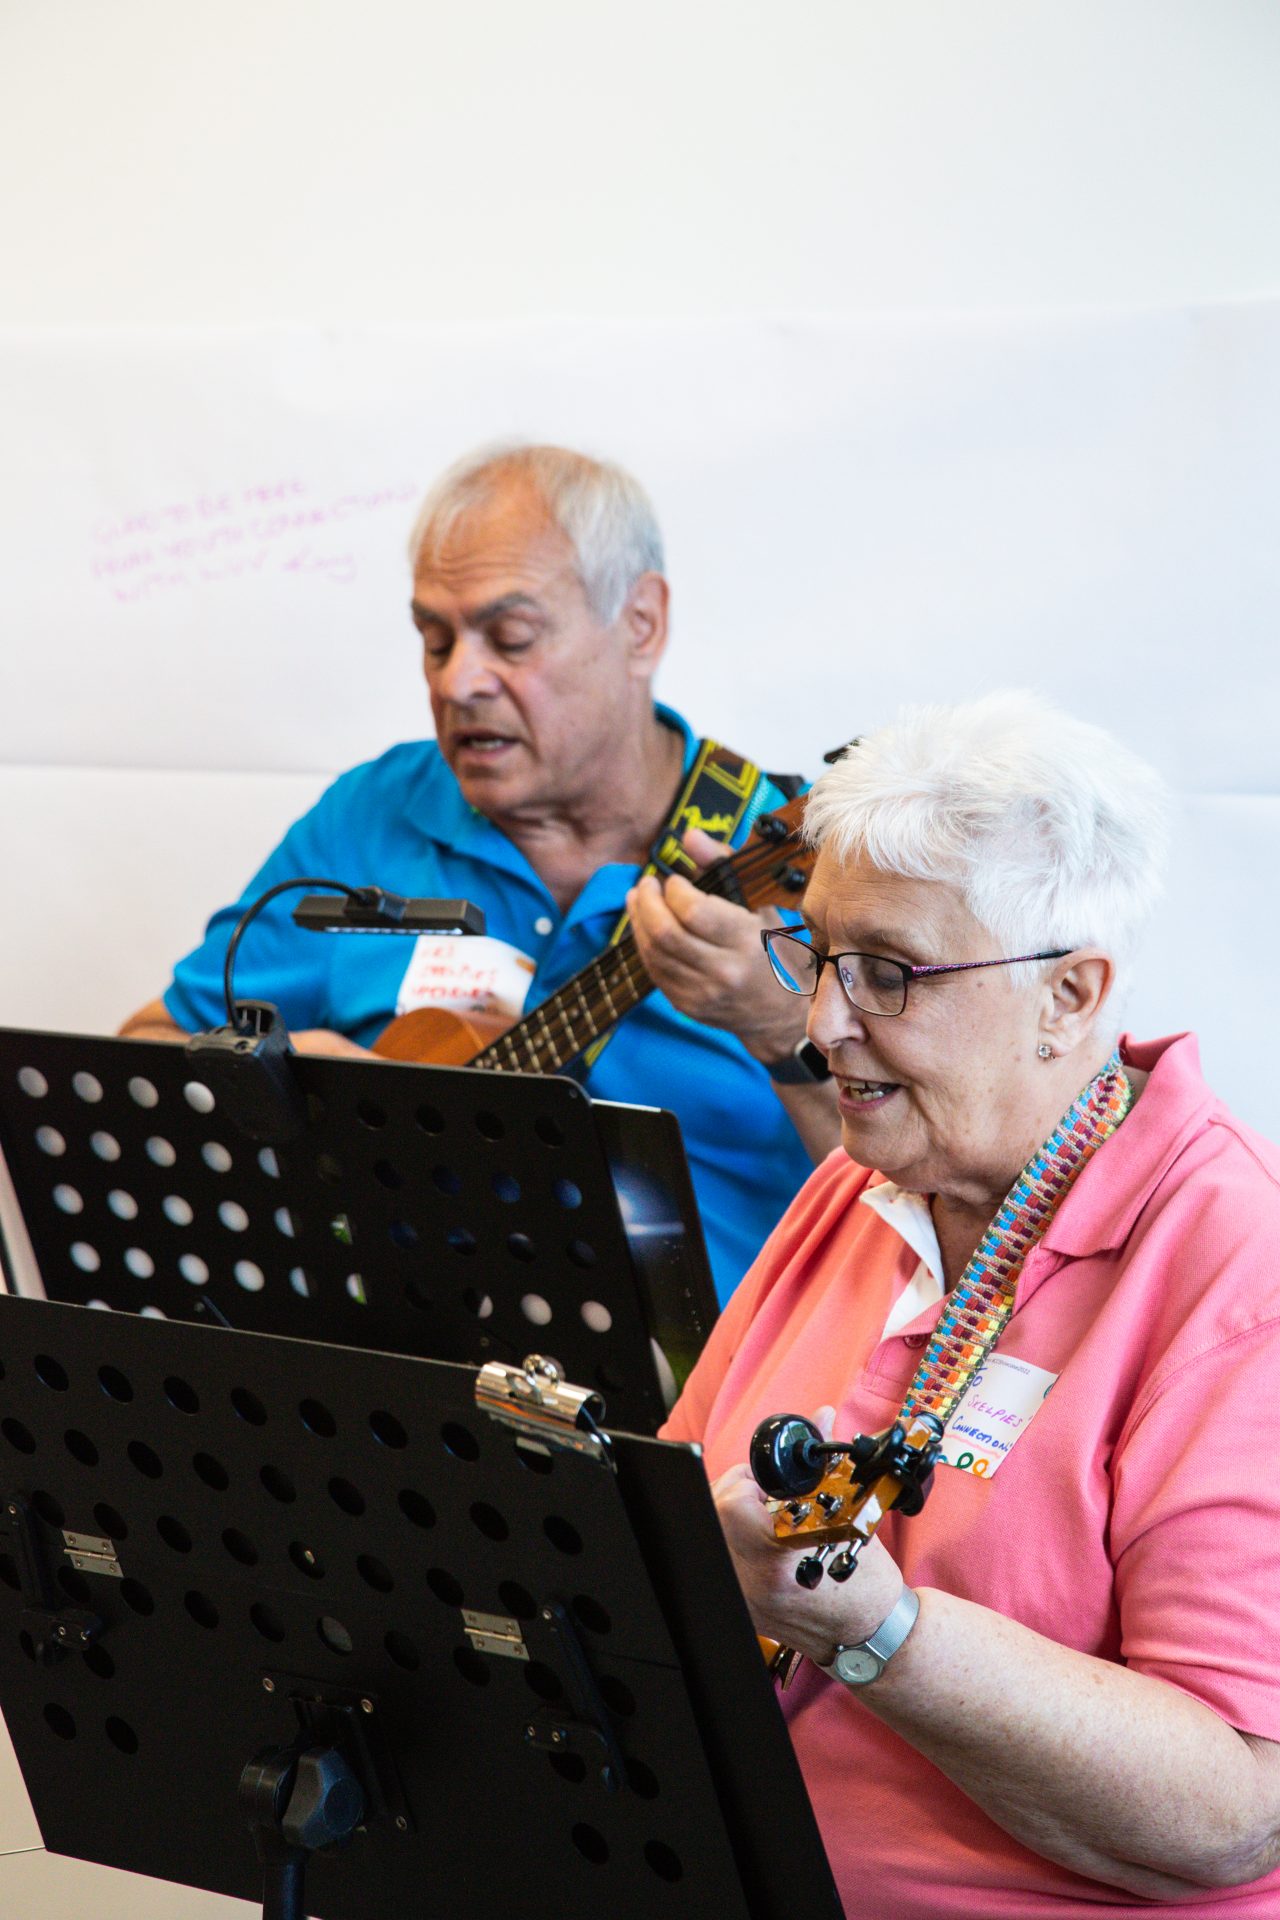 man and woman playing ukulele behind music stands.